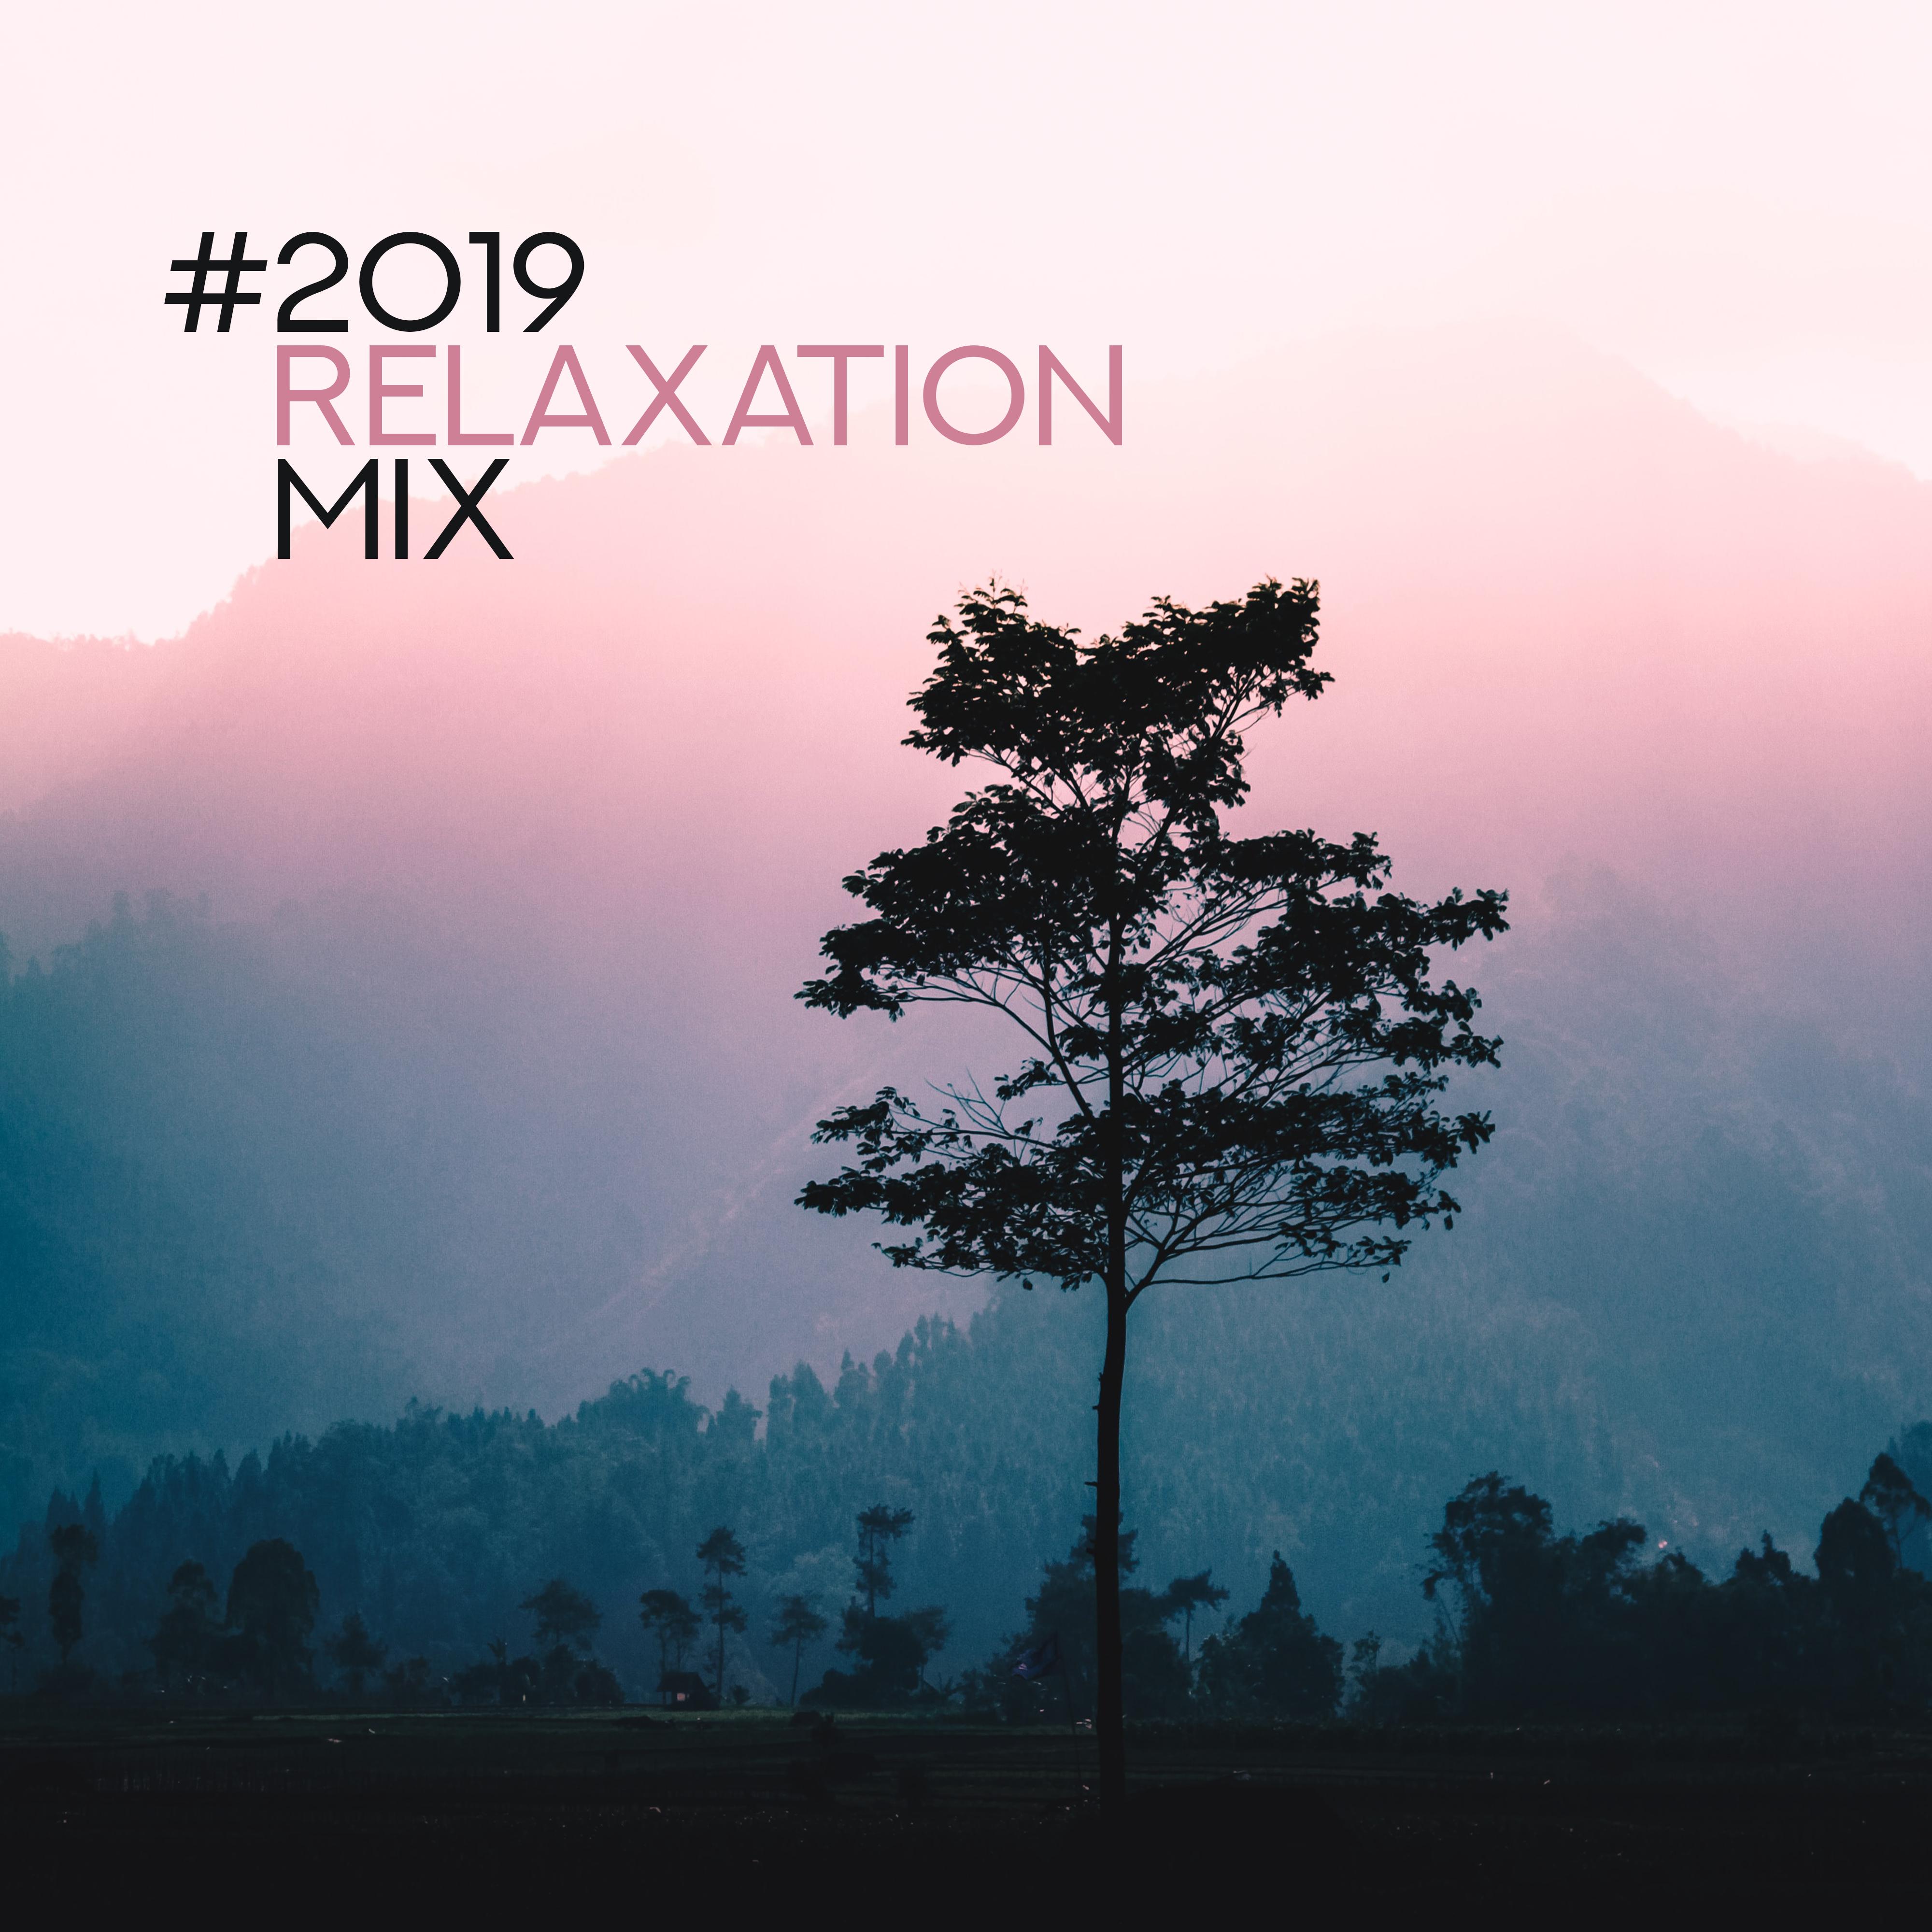 2019 Relaxation Mix  Compilation of Most Relaxing Ambient  Nature New Age Soothing Music, Songs for Total Calming Down, Stress Relief, Full Rest After Long Day